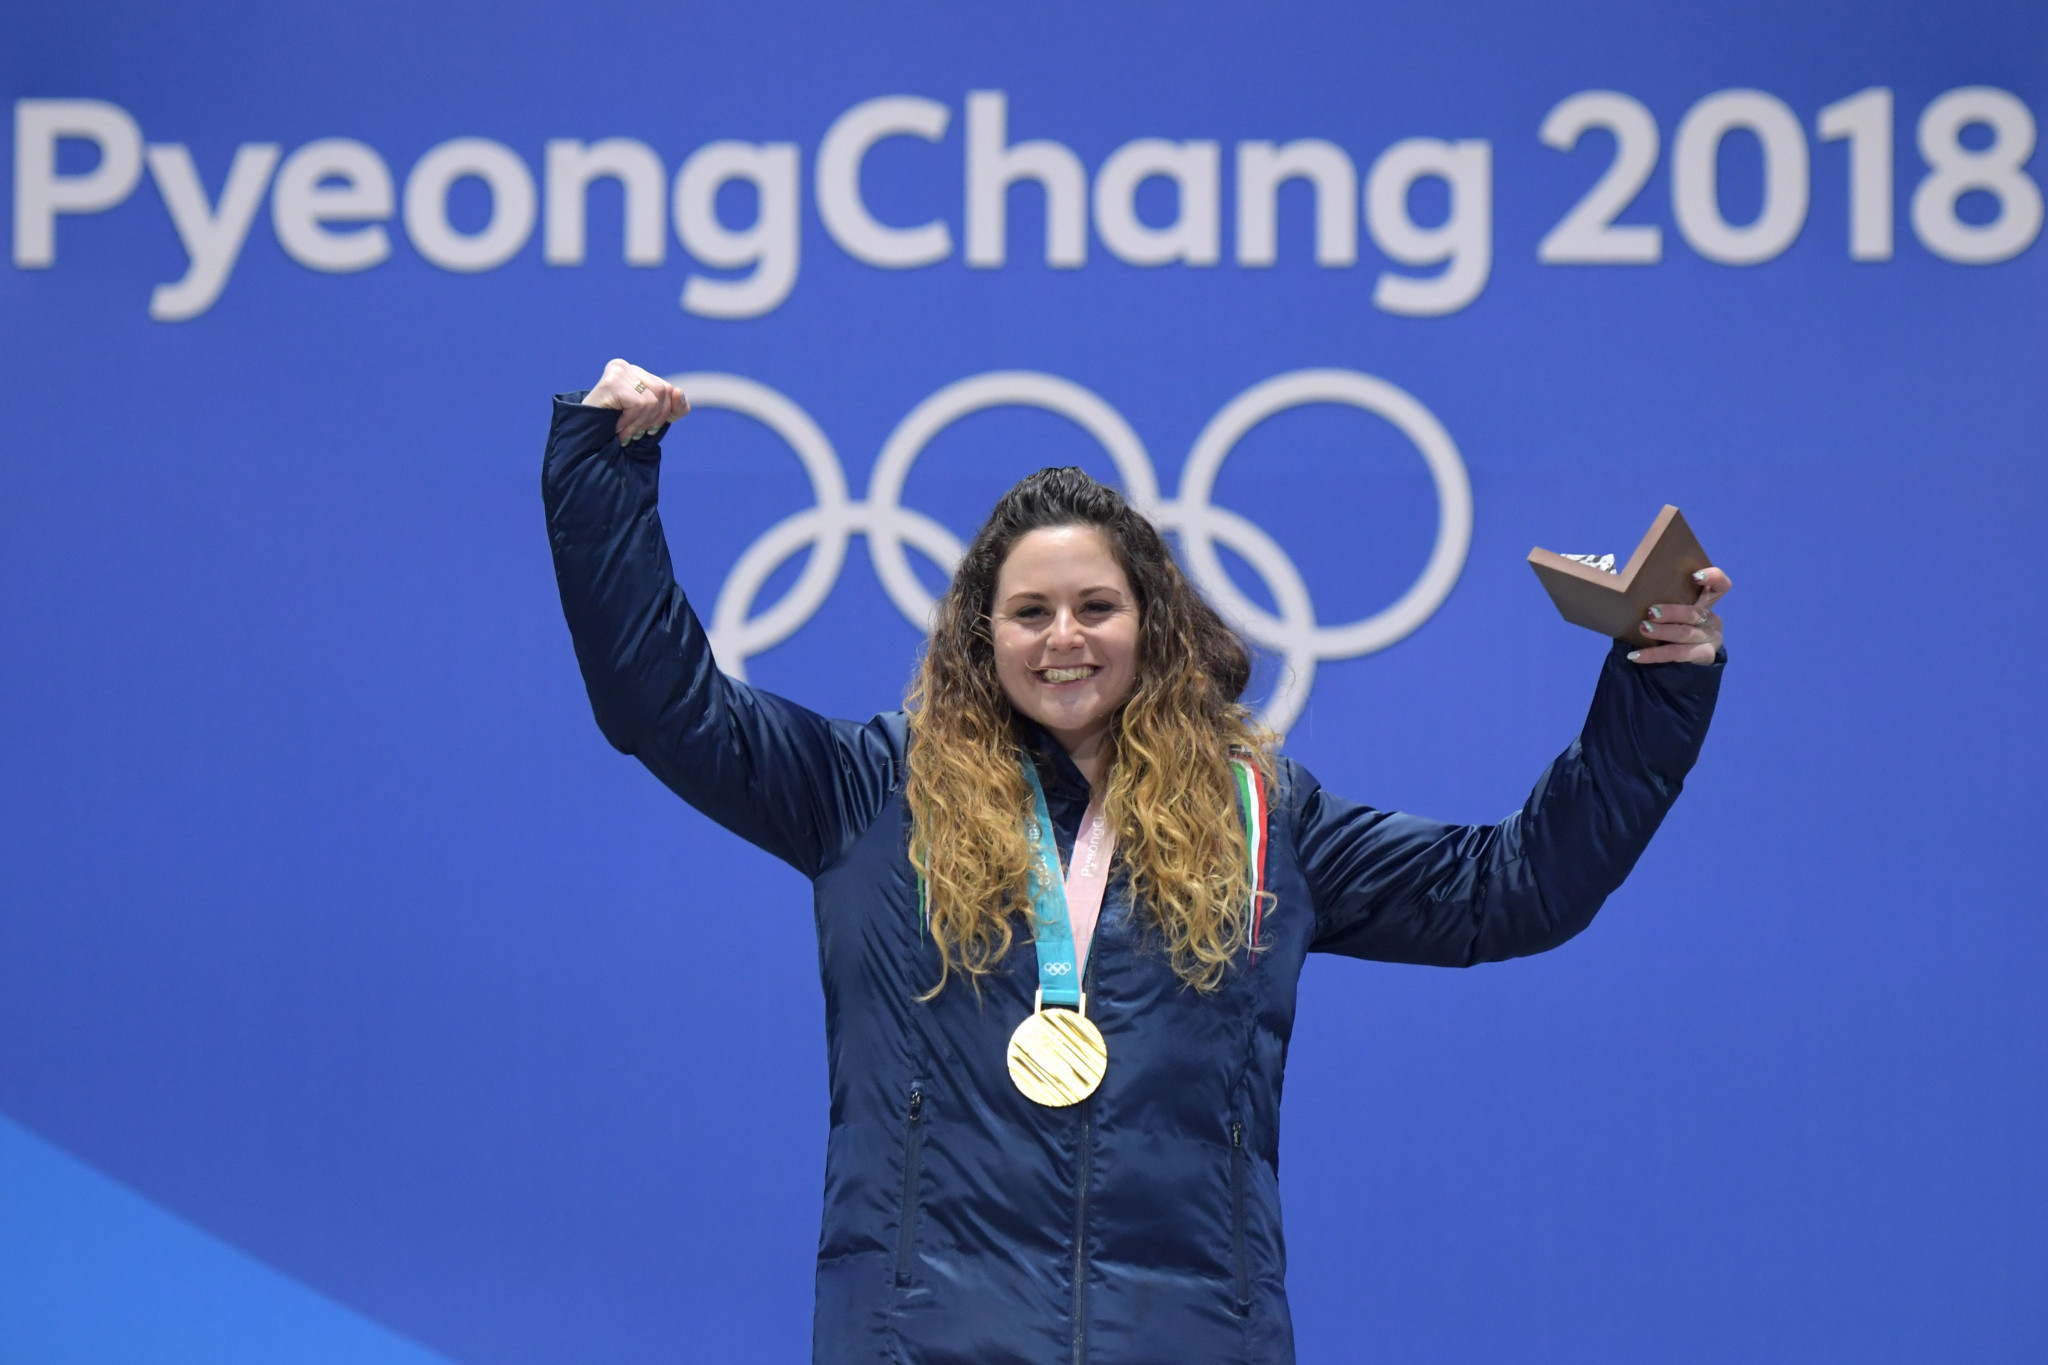 Italy's Olympic gold medallist Michela Moioli will hope to preserve her status at the top of the women's rankings ©Getty Images